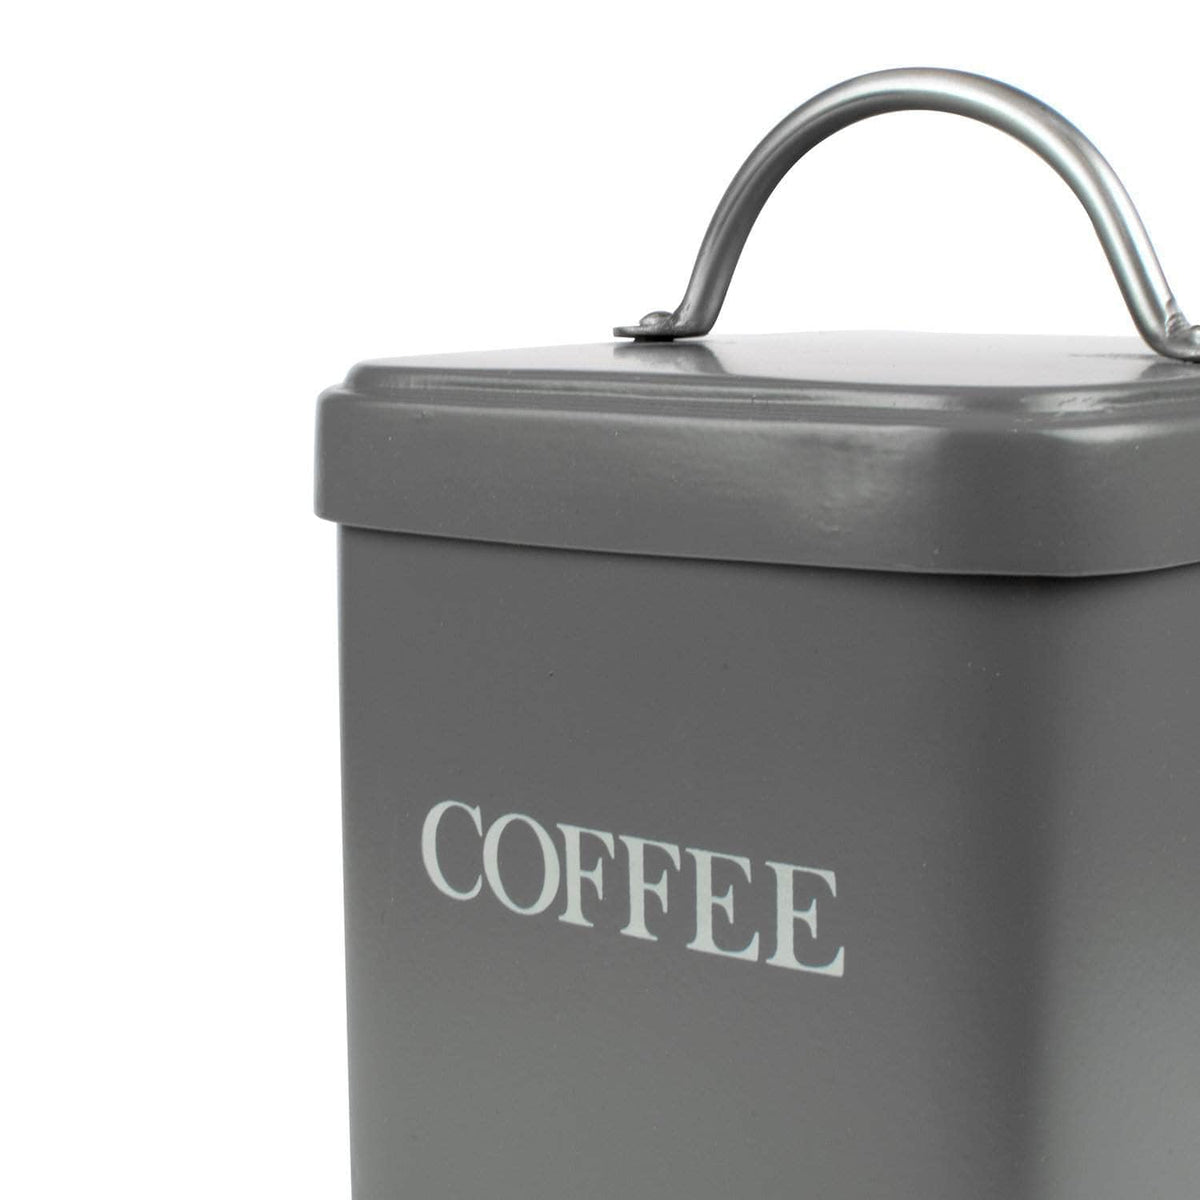 *Not Quite Perfect* Coffee canister in charcoal